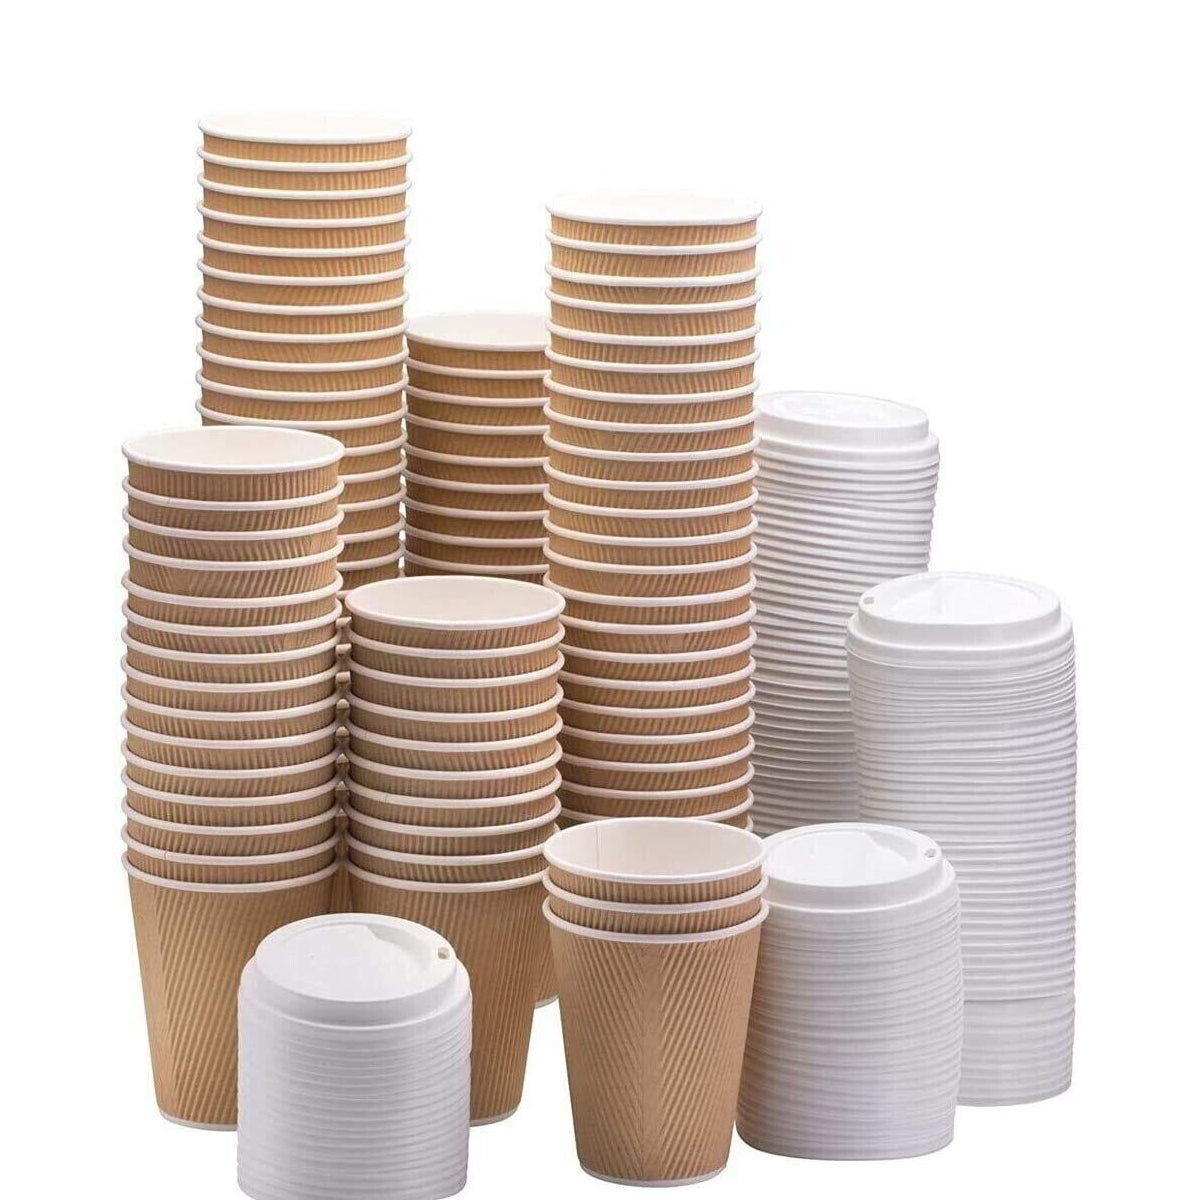 Disposable Cups With Lid 8 Oz - 100 Pcs